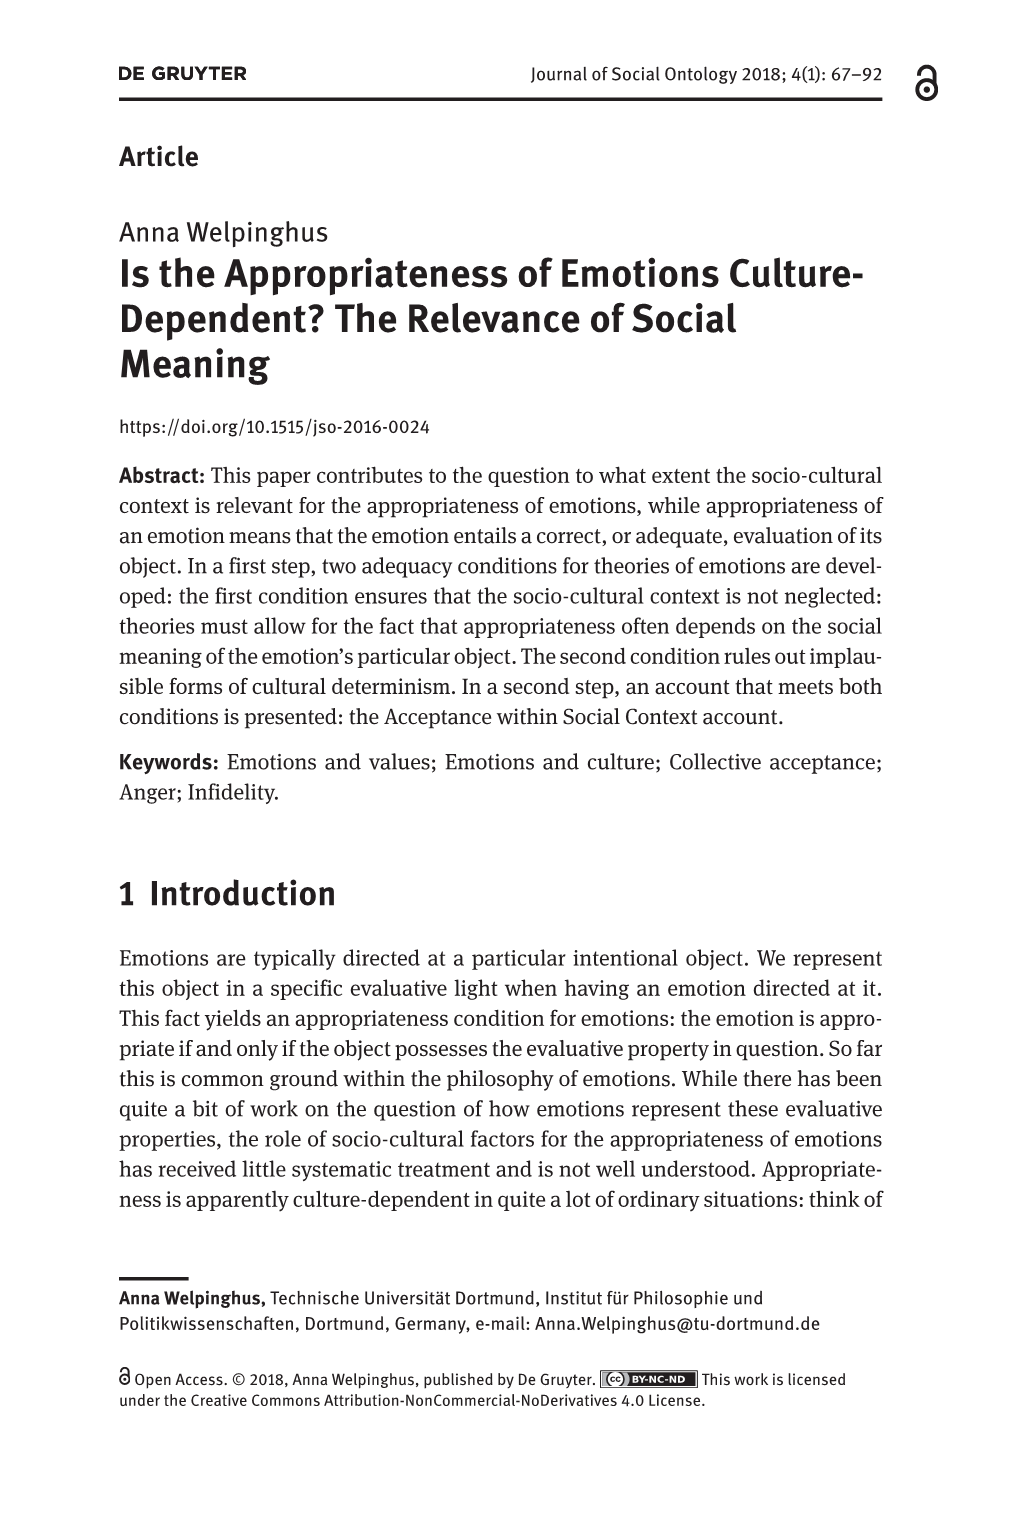 Is the Appropriateness of Emotions Culture- Dependent? the Relevance of Social Meaning